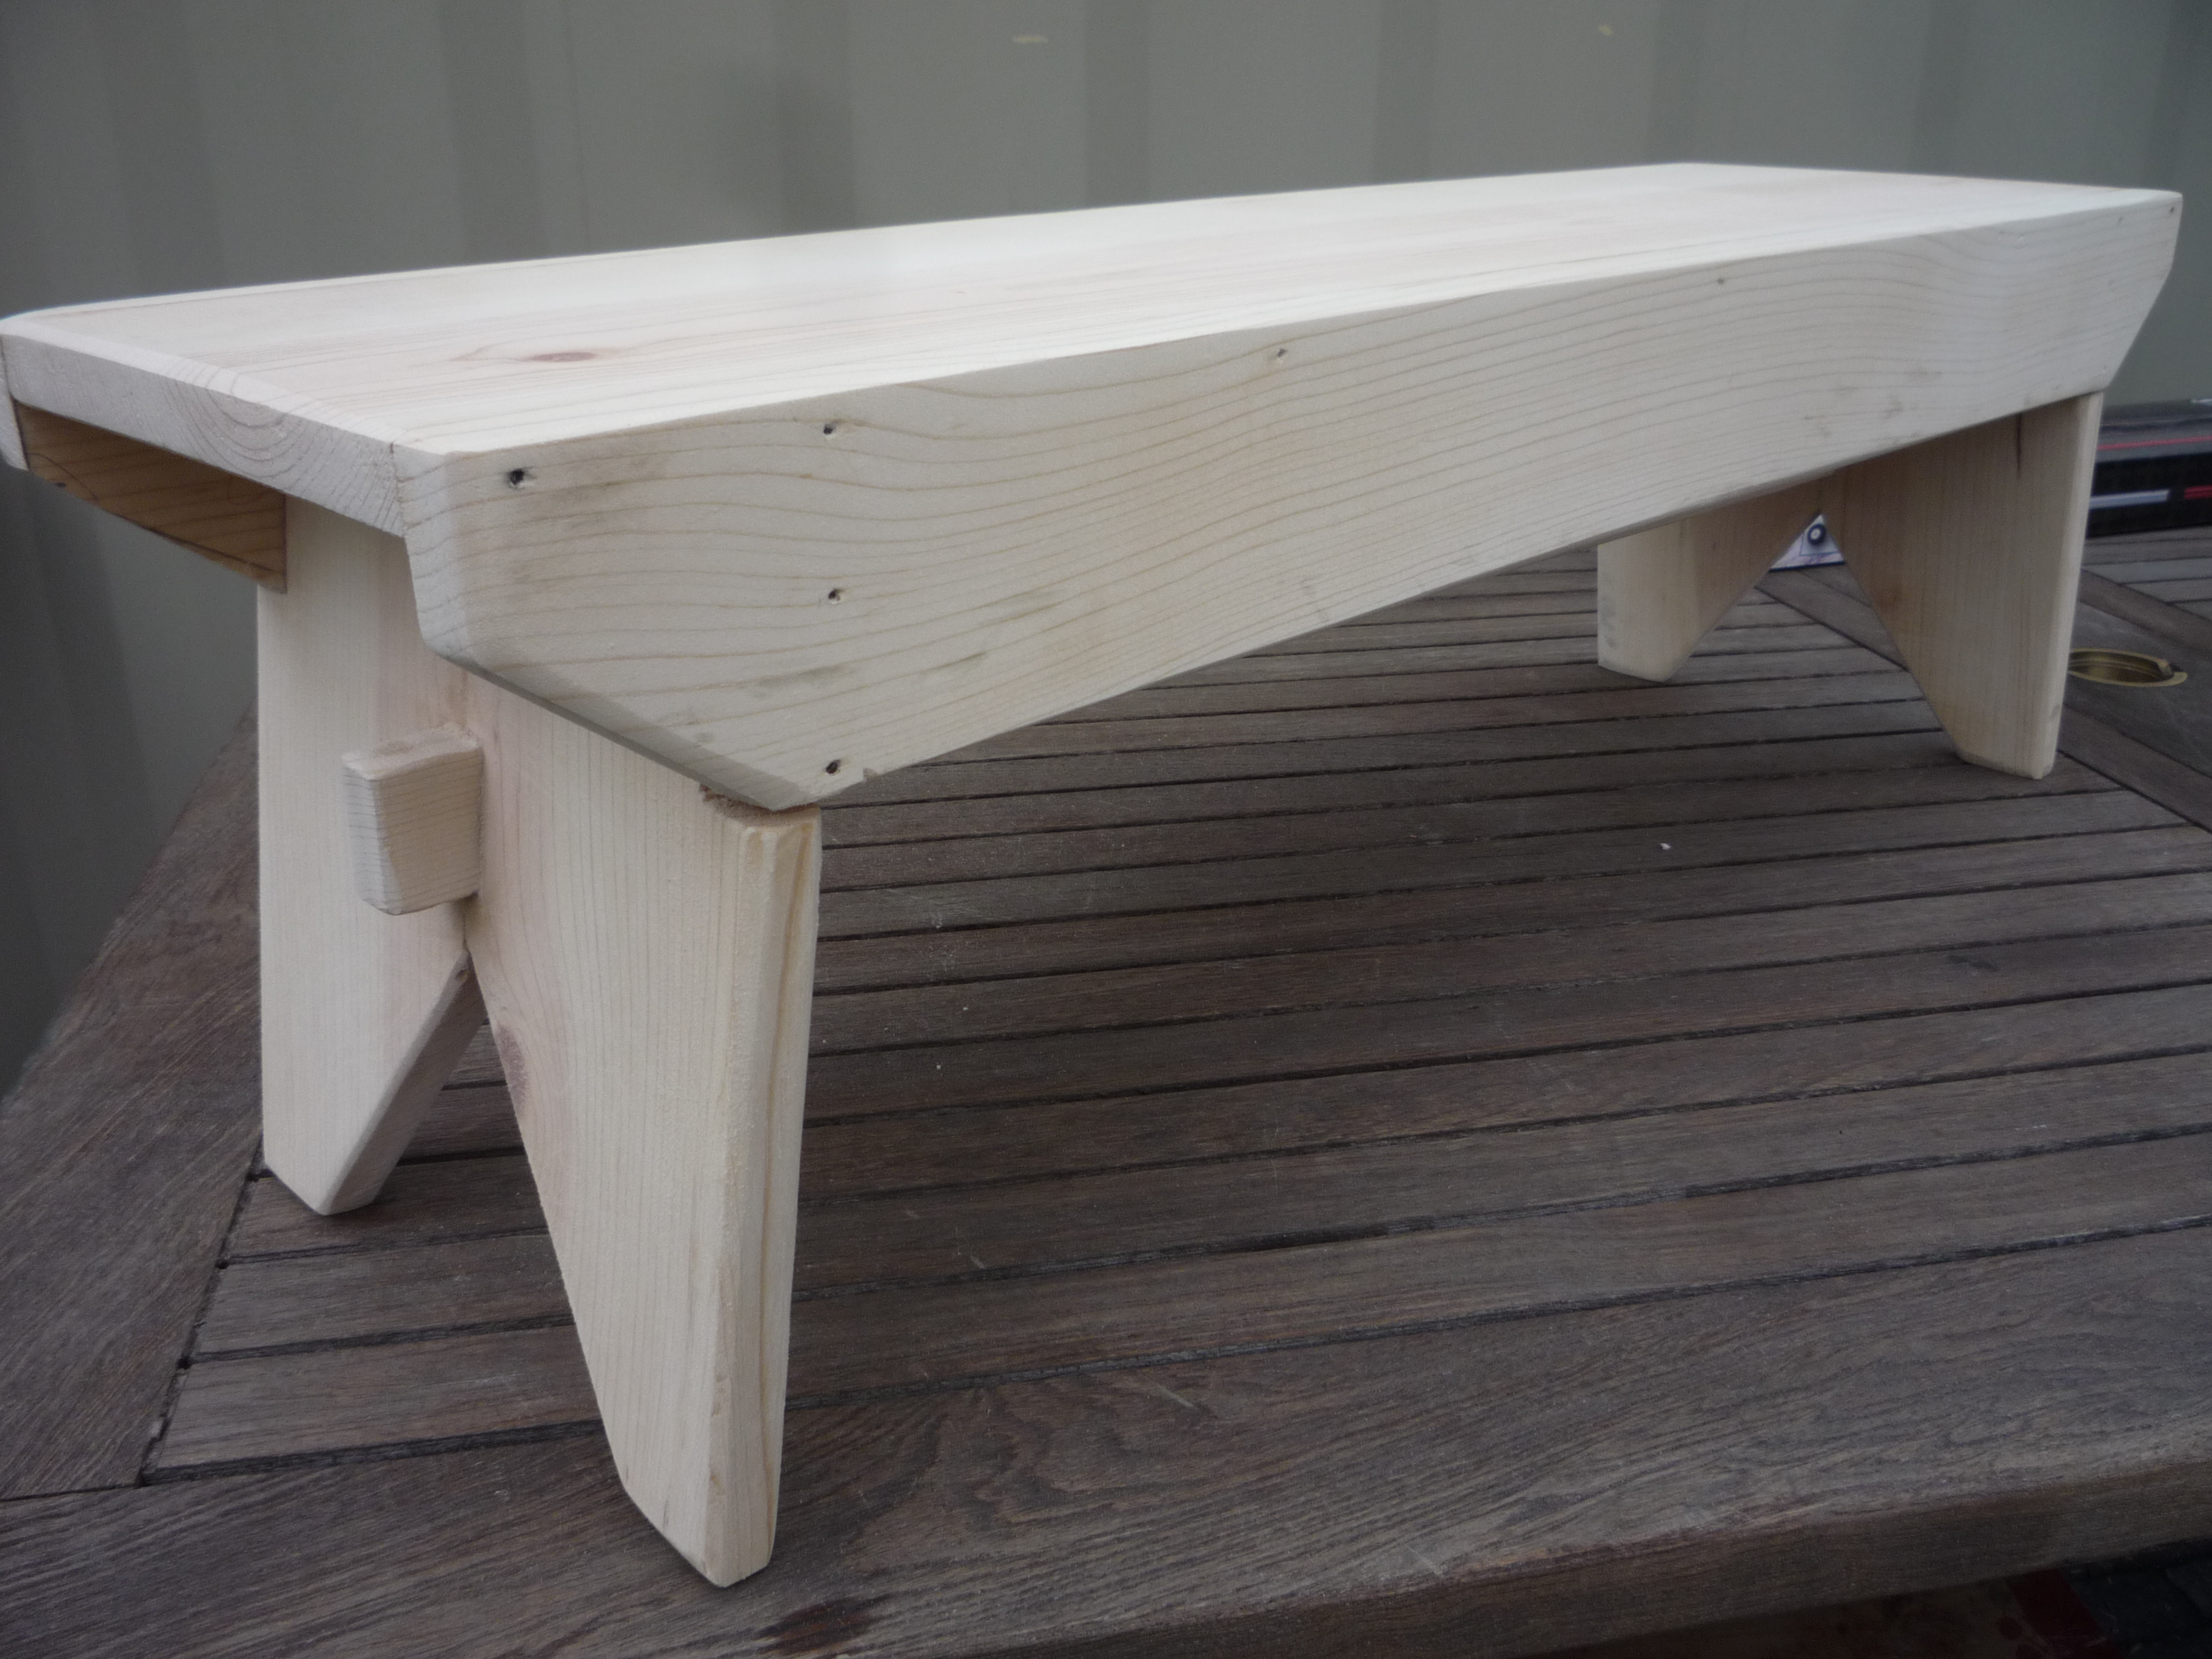 How To Make A Simple Wood Bench  Good Woodworking Projects